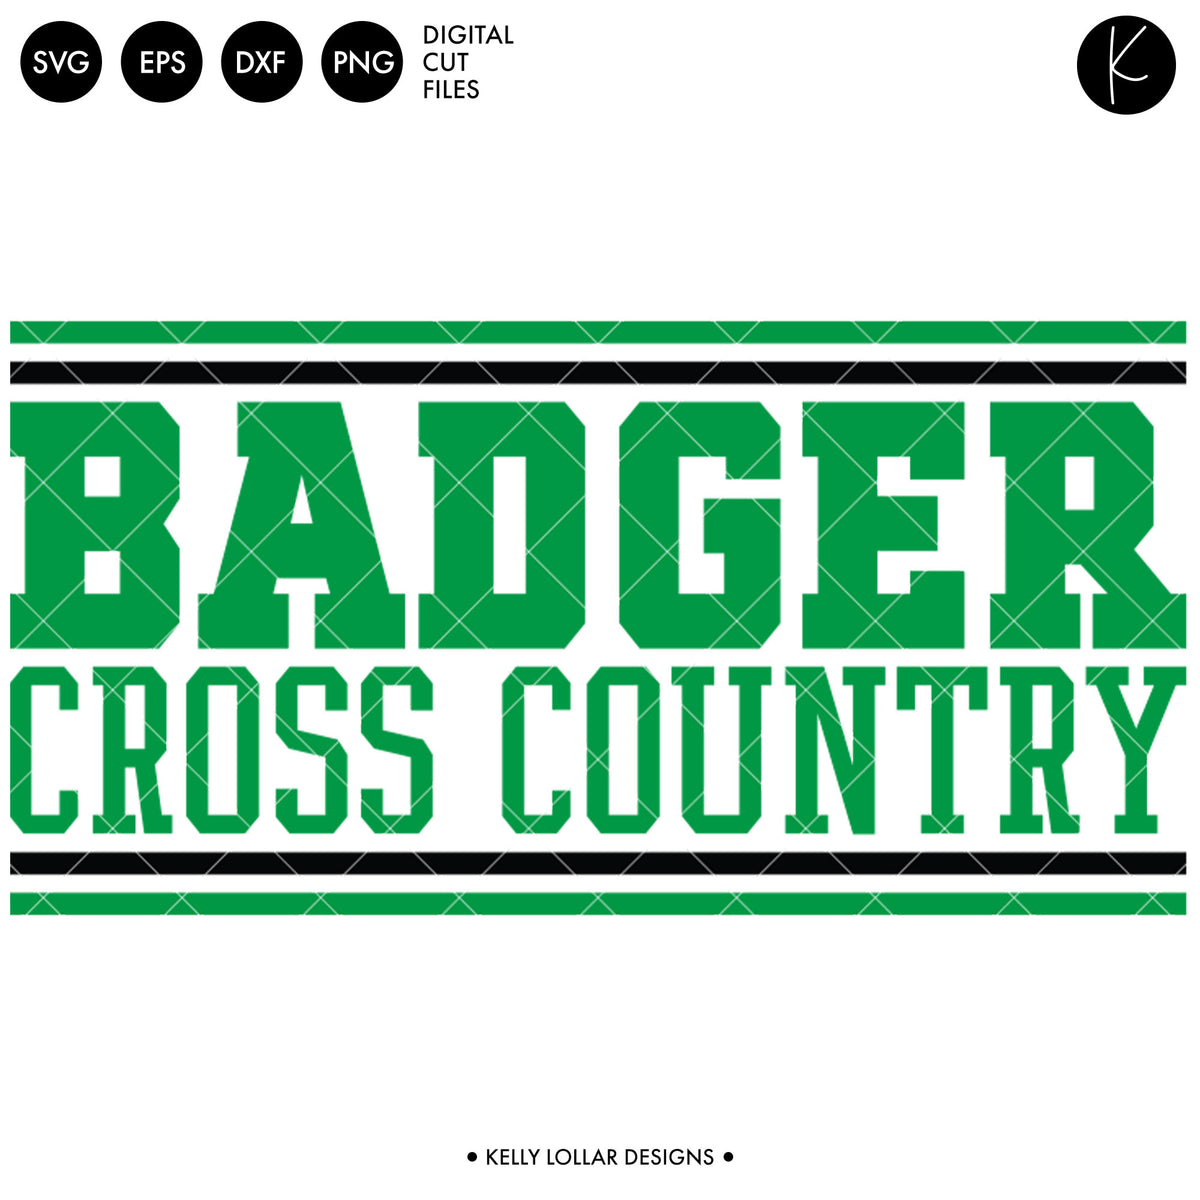 Badgers Cross Country Bundle | SVG DXF EPS PNG Cut Files